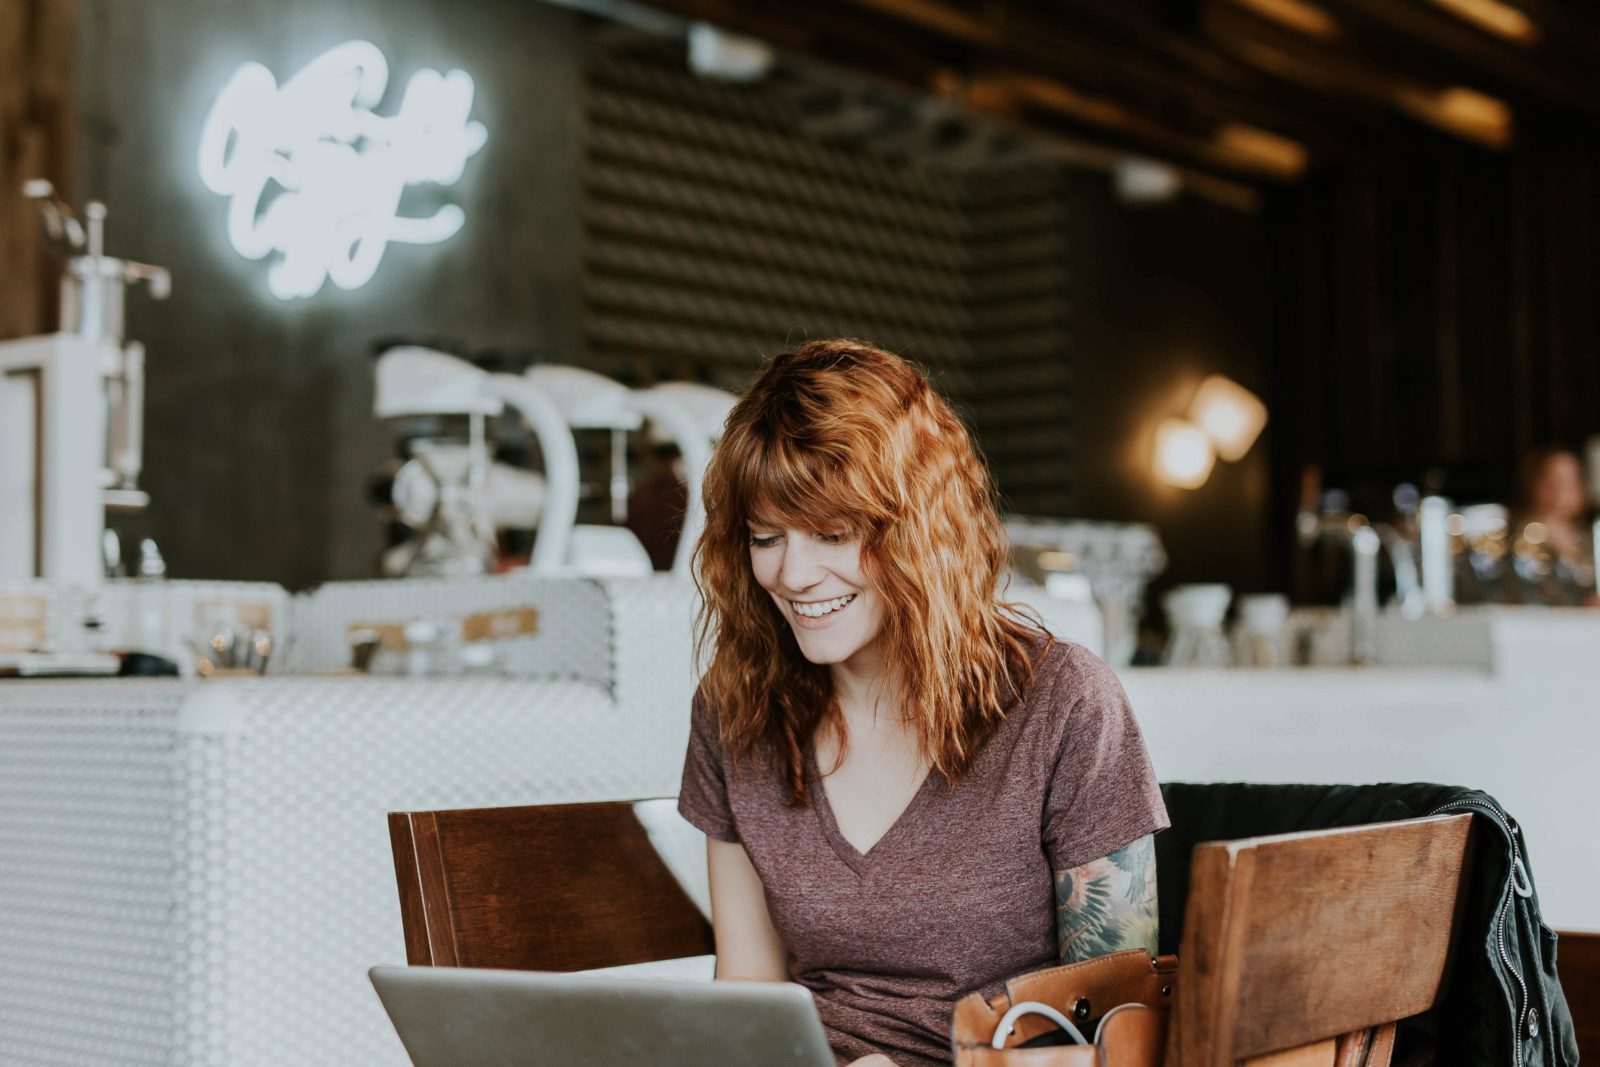 A woman with red wavy hair is sitting in a nice coffee shop. She's smiling down at her laptop, which we're positive means she's thinking about her own favorite Generosity Xchange takeaways.